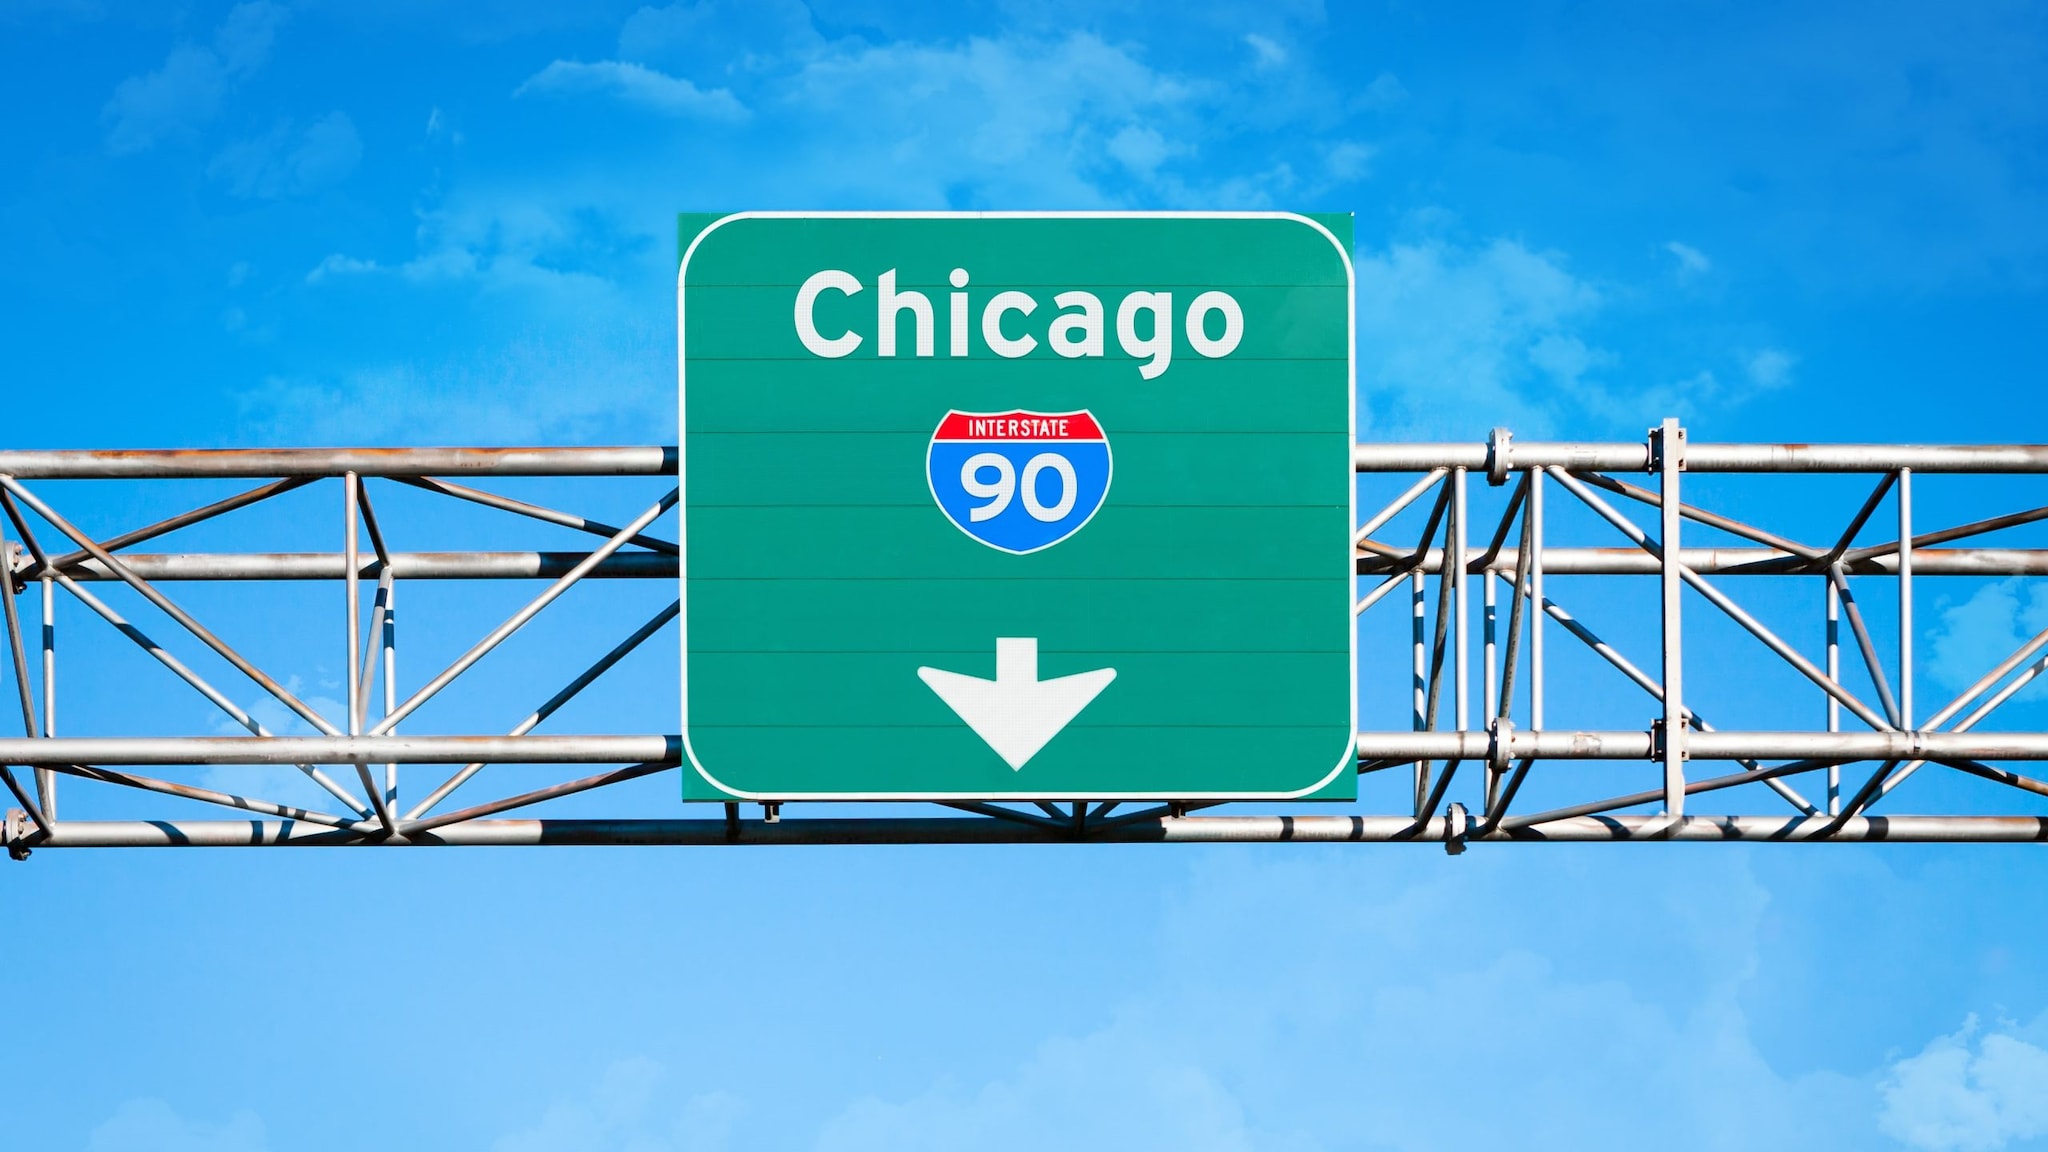 Highway exit sign for Chicago